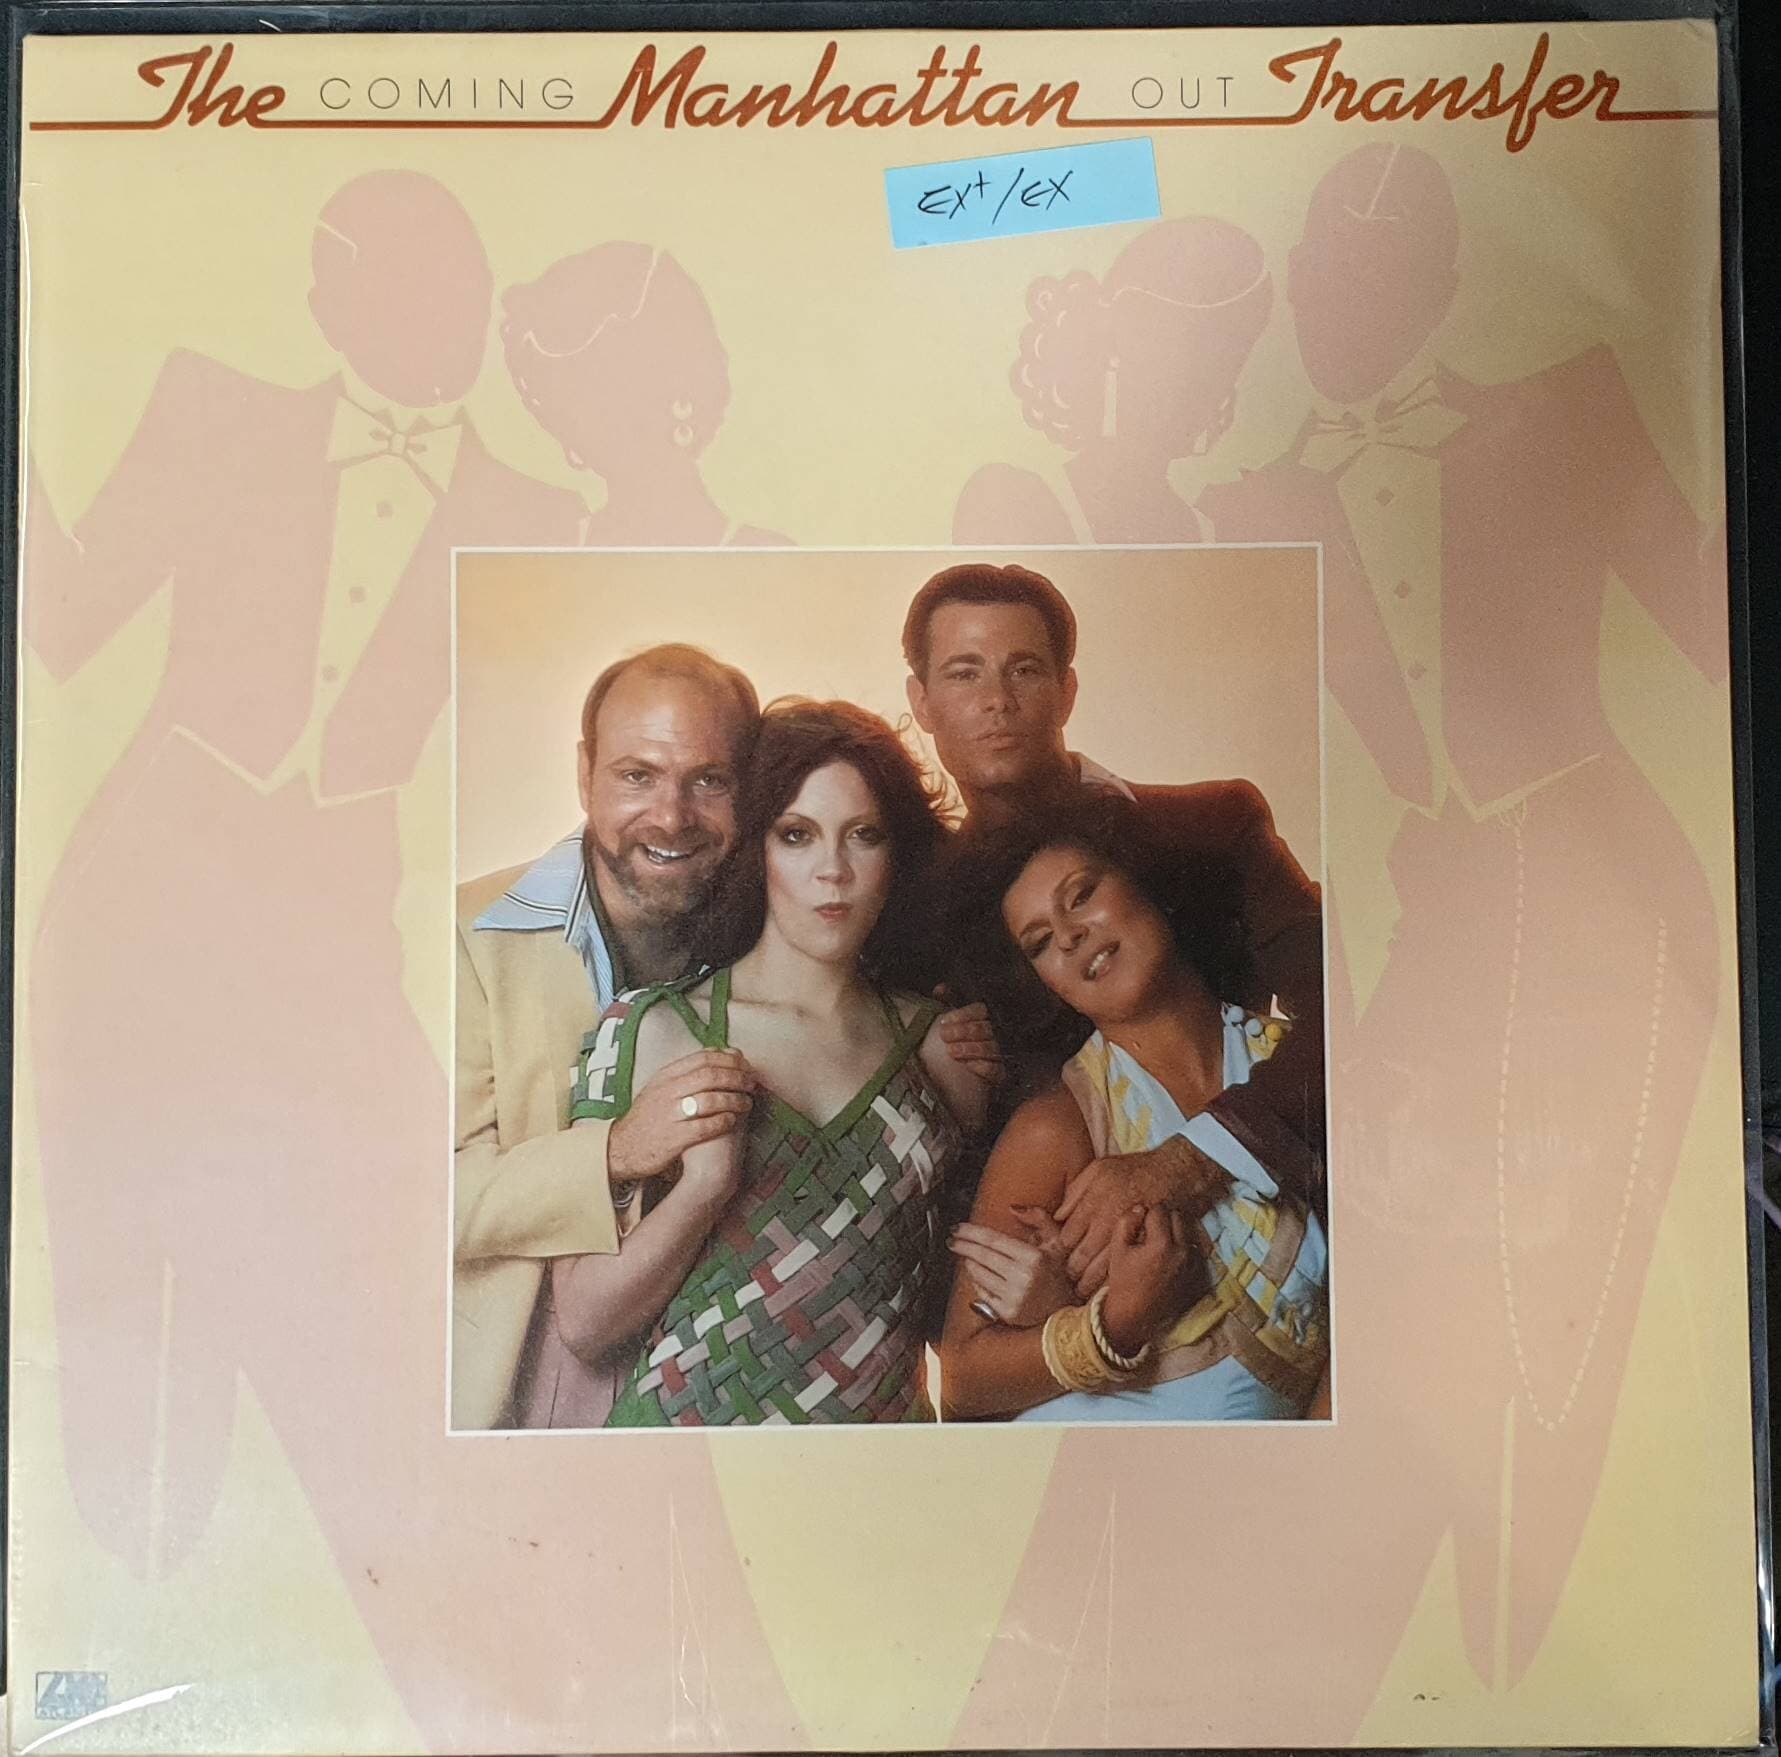 The Manhattan Transfer - coming out